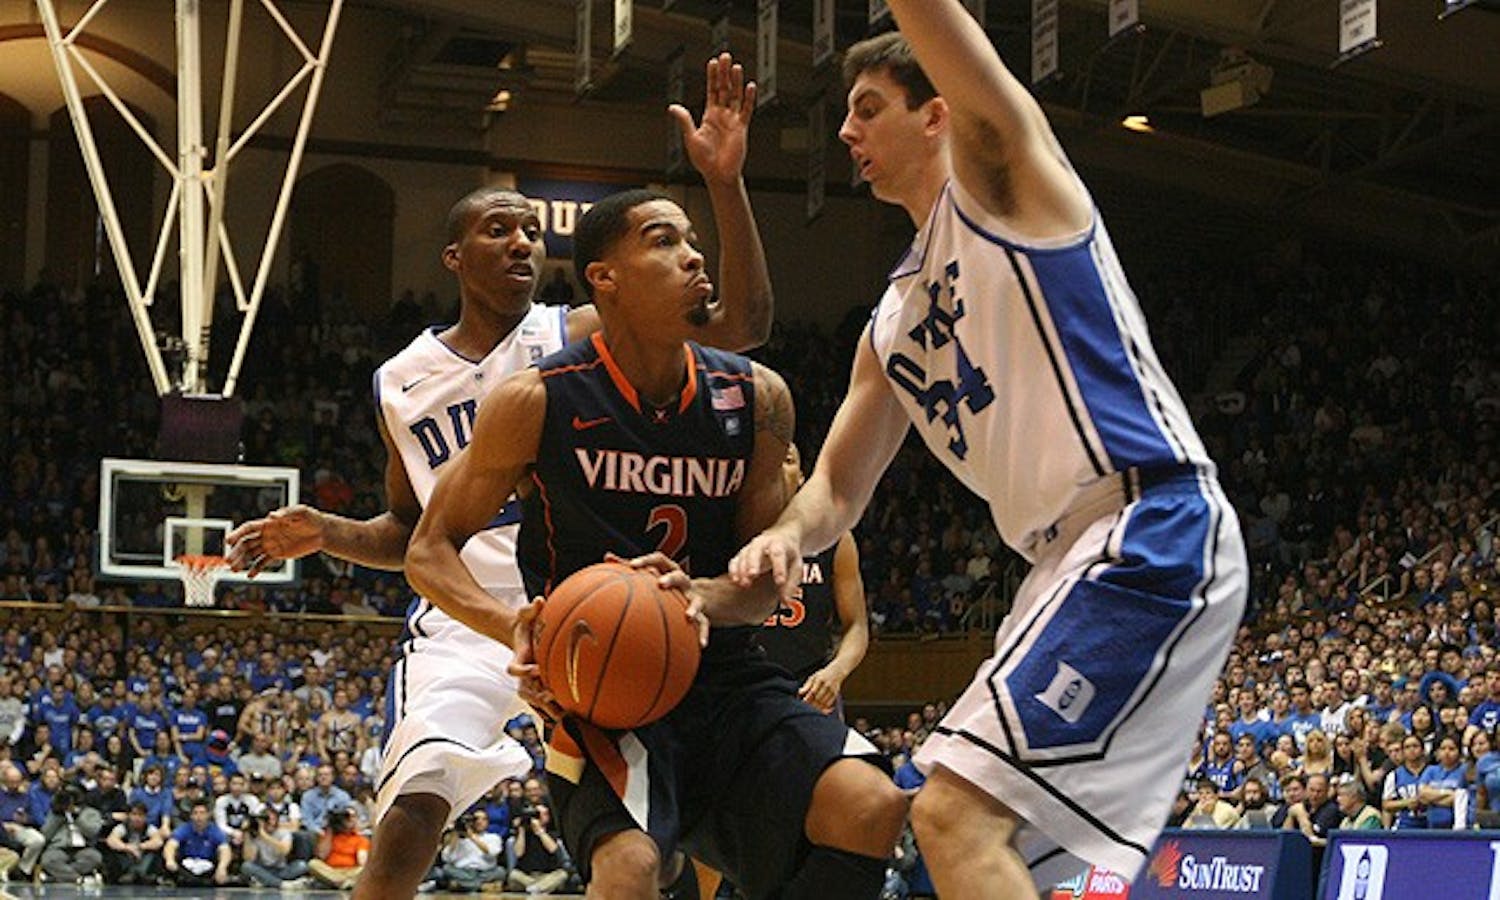 Virginia’s Mustapha Farrakhan scored 15 points in the Cavaliers’ 76-60 loss to Duke in Cameron a month ago.